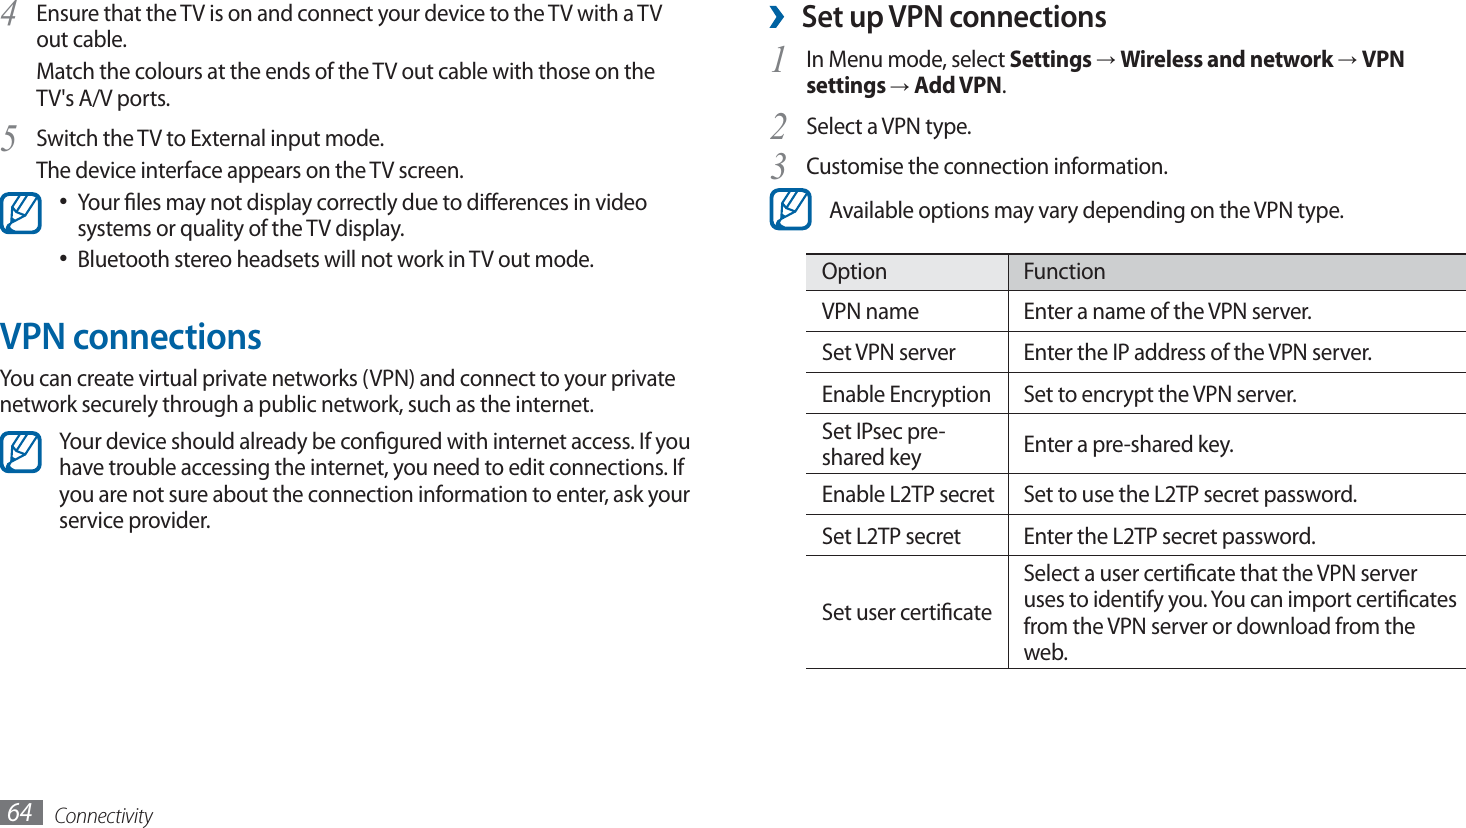 Connectivity64Set up VPN connections ›In Menu mode, select 1 Settings → Wireless and network → VPN settings → Add VPN.Select a VPN type.2 Customise the connection information.3 Available options may vary depending on the VPN type.Option FunctionVPN name Enter a name of the VPN server.Set VPN server Enter the IP address of the VPN server.Enable Encryption Set to encrypt the VPN server.Set IPsec pre-shared key Enter a pre-shared key.Enable L2TP secret Set to use the L2TP secret password.Set L2TP secret Enter the L2TP secret password.Set user certicateSelect a user certicate that the VPN server uses to identify you. You can import certicates from the VPN server or download from the web.Ensure that the TV is on and connect your device to the TV with a TV 4 out cable.Match the colours at the ends of the TV out cable with those on the TV&apos;s A/V ports.Switch the TV to External input mode.5 The device interface appears on the TV screen.Your les may not display correctly due to dierences in video • systems or quality of the TV display.Bluetooth stereo headsets will not work in TV out mode.• VPN connectionsYou can create virtual private networks (VPN) and connect to your private network securely through a public network, such as the internet.Your device should already be congured with internet access. If you have trouble accessing the internet, you need to edit connections. If you are not sure about the connection information to enter, ask your service provider.